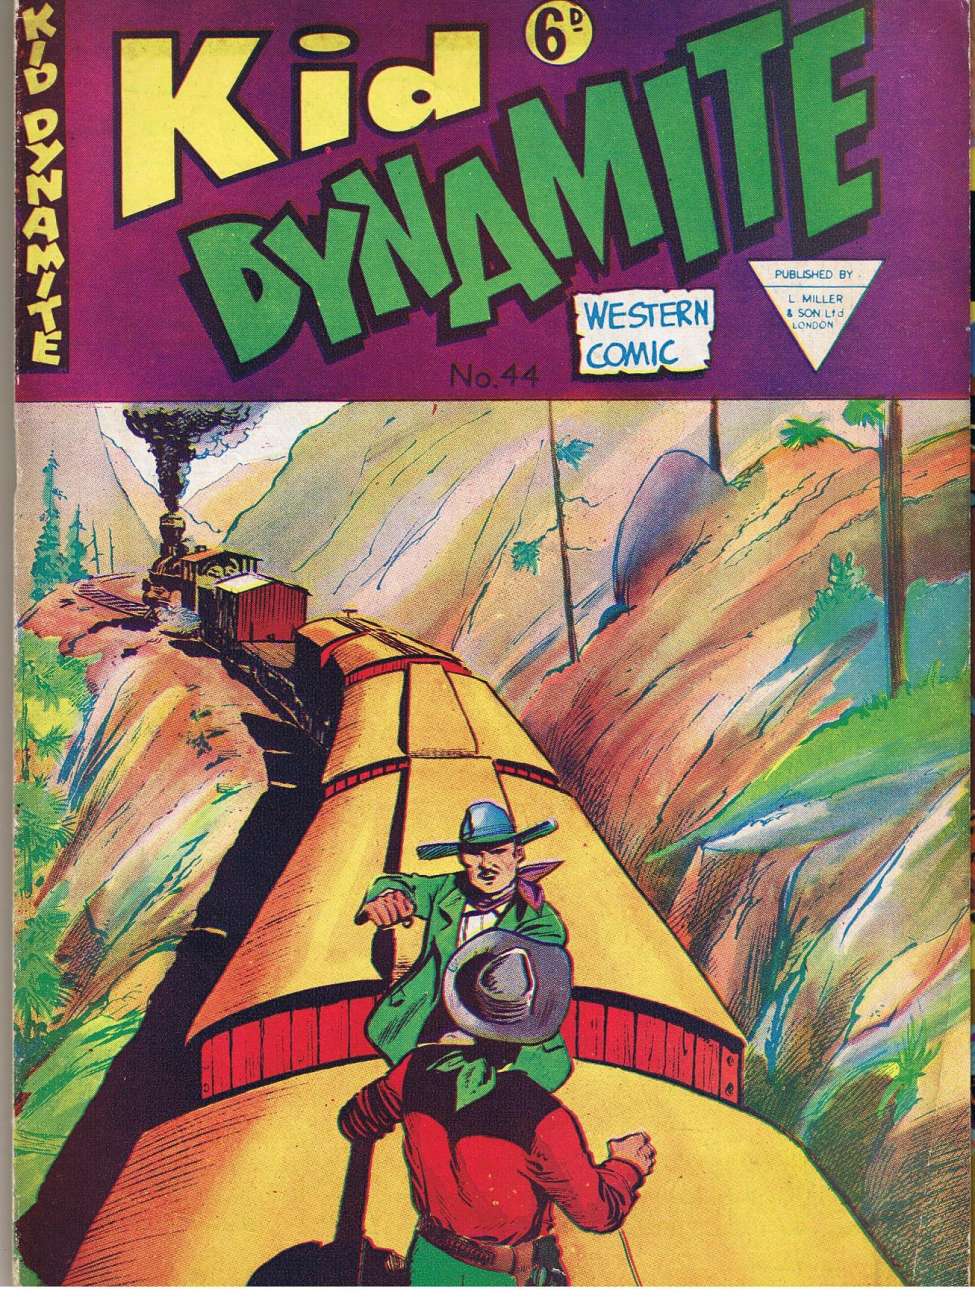 Book Cover For Kid Dynamite Western Comic 44